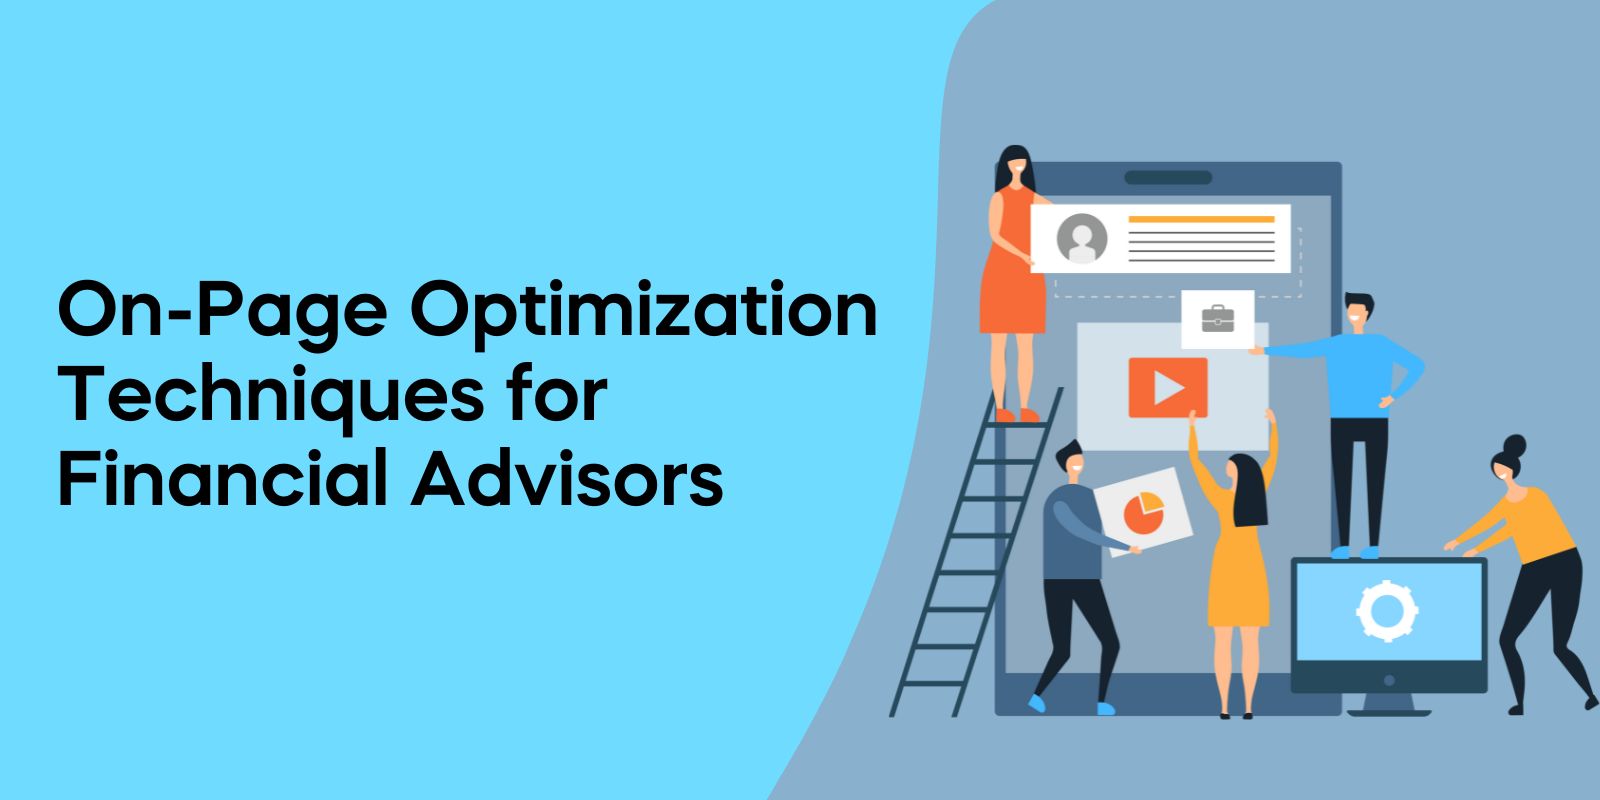 On-Page Optimization Techniques for Financial Advisors